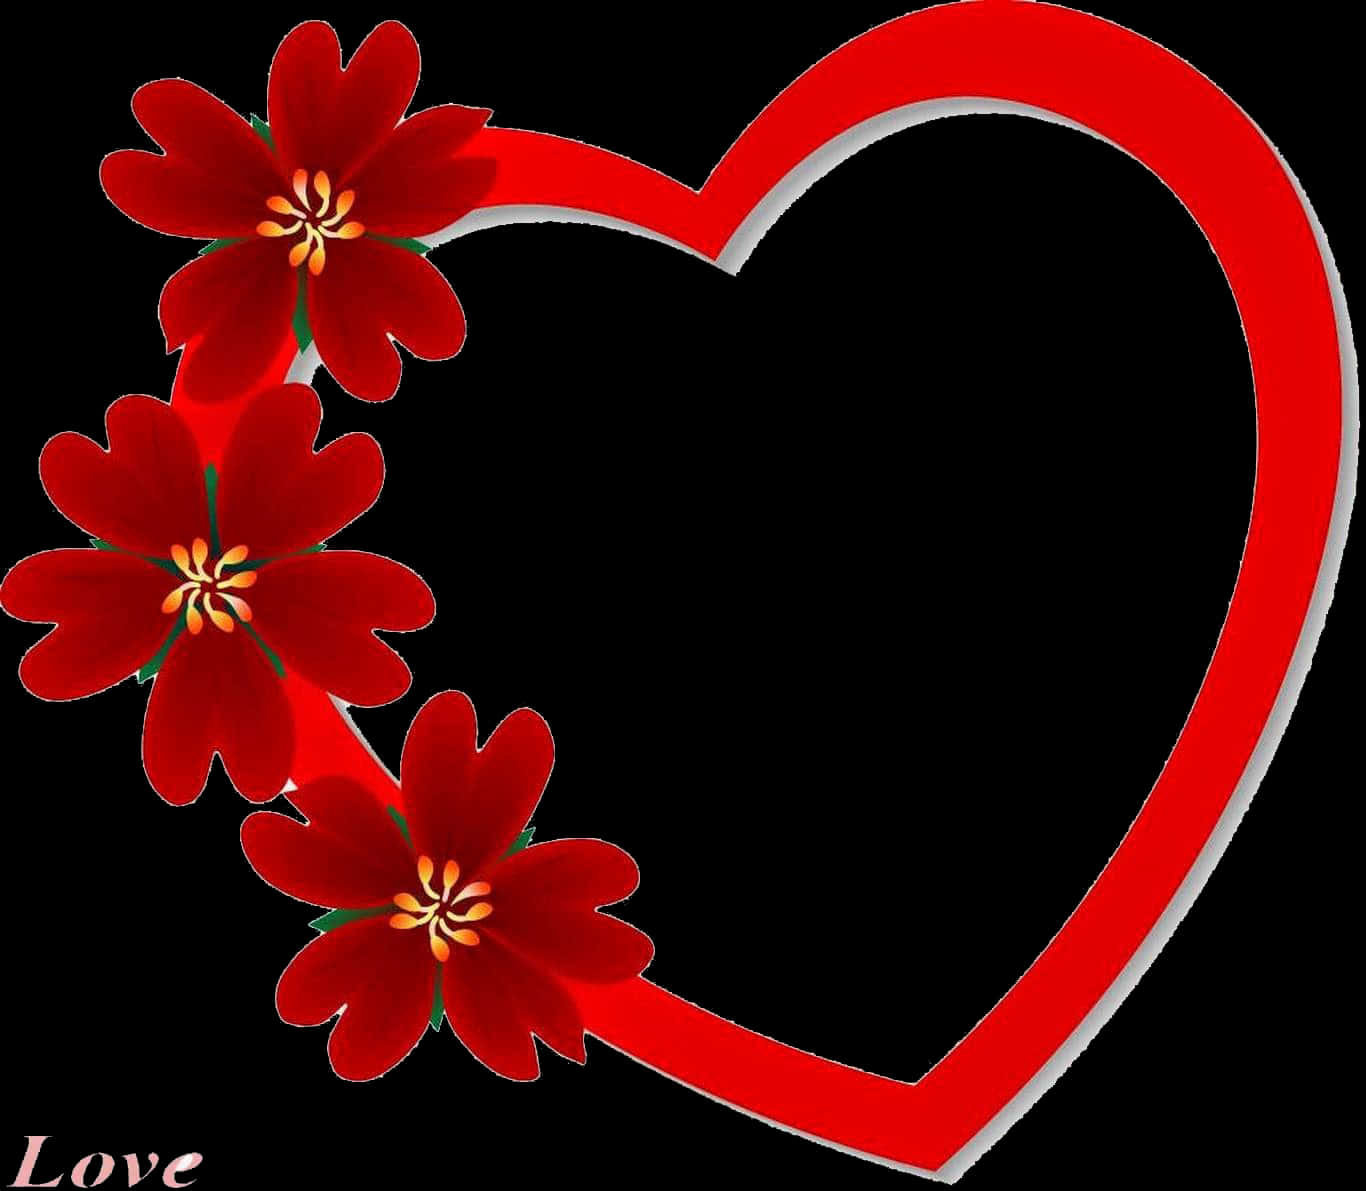 Floral Red Heart Images With Transparent Background